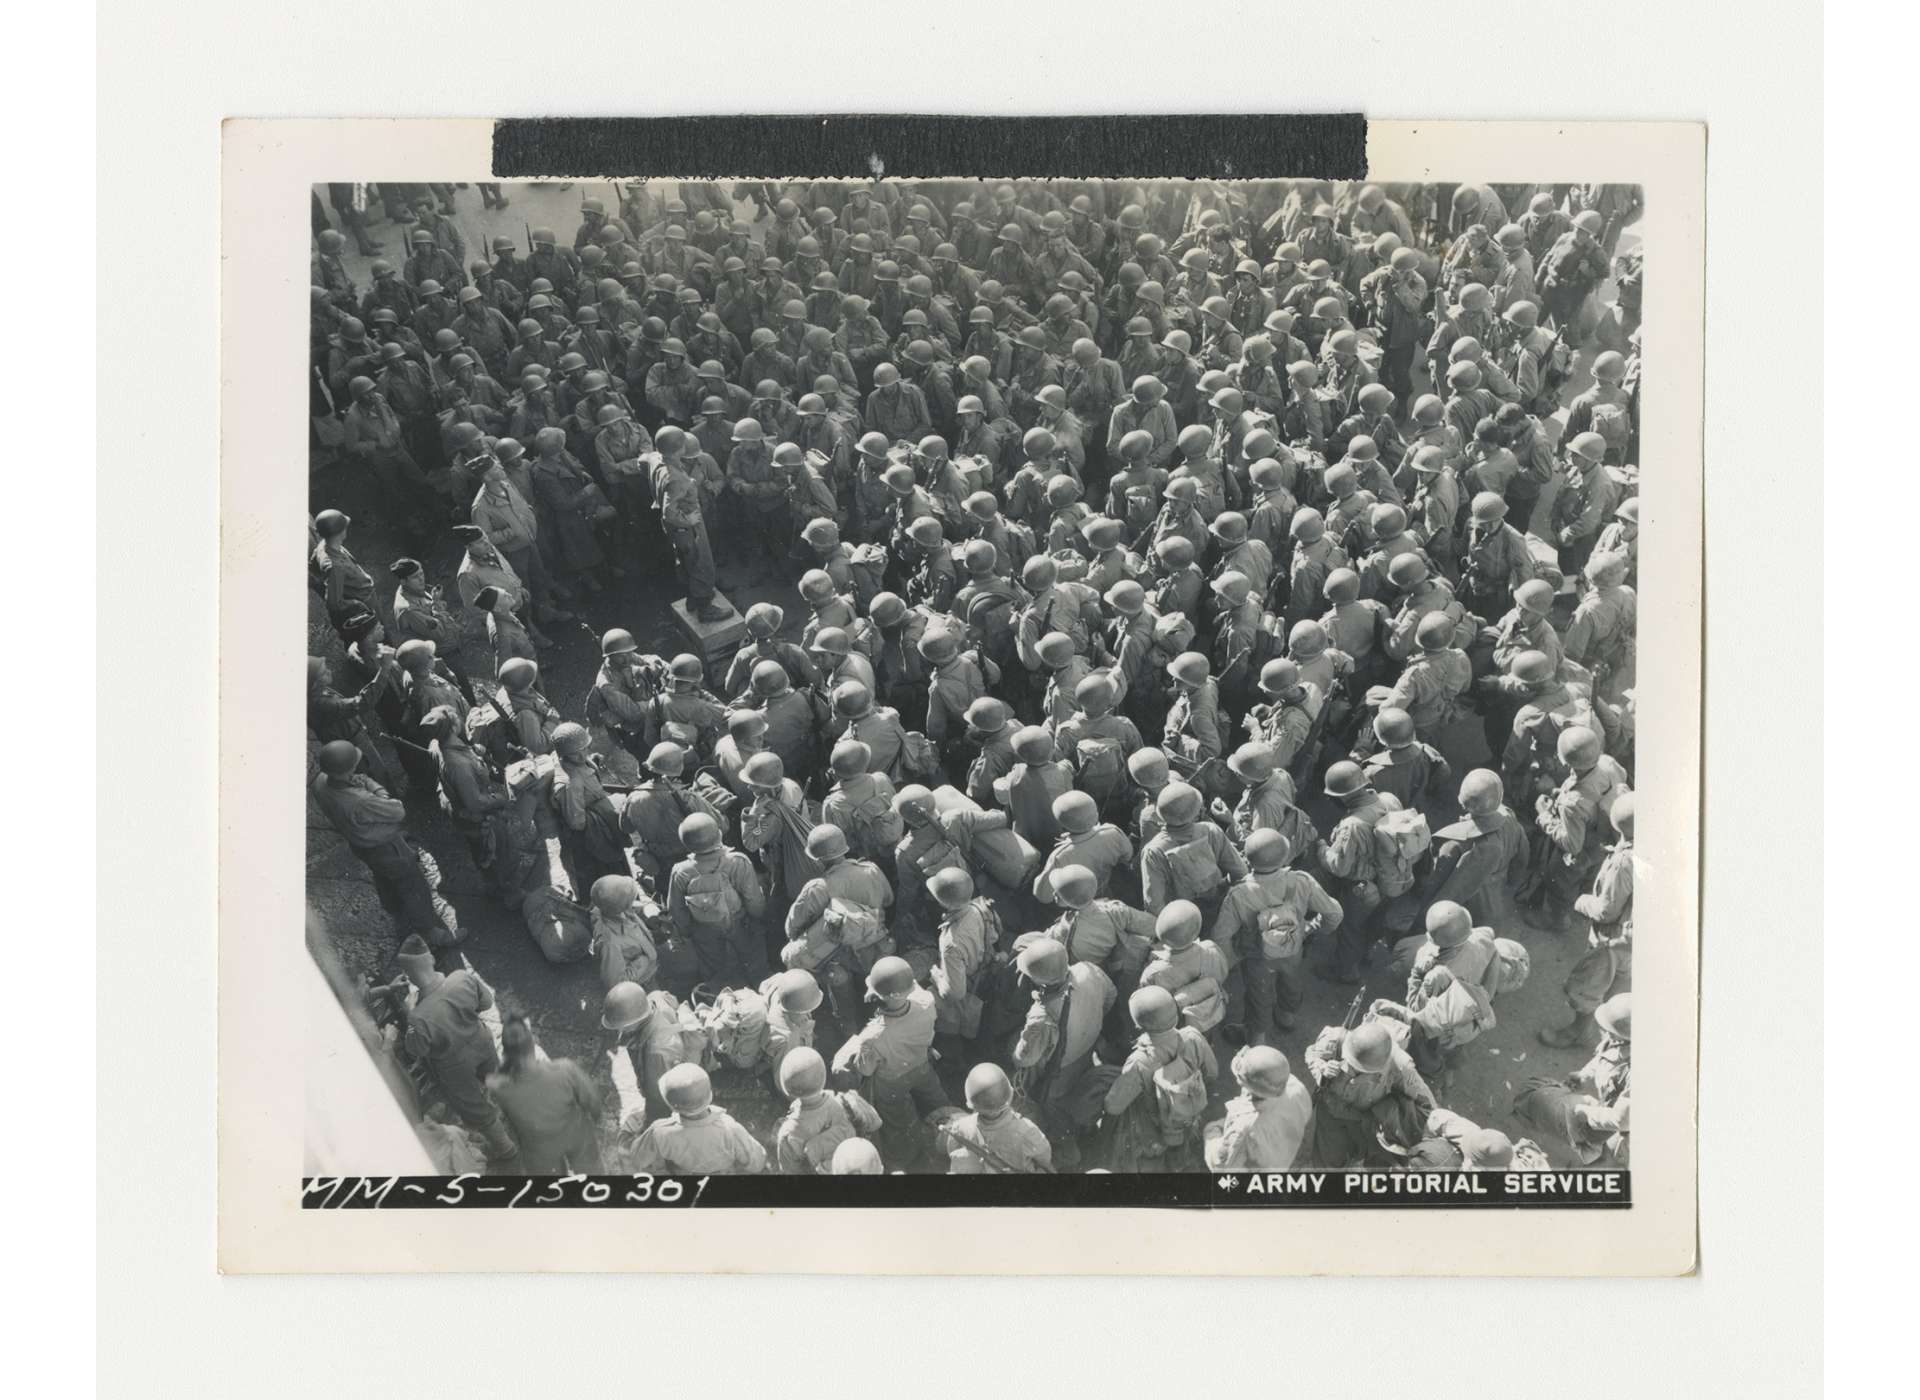 Hundreds of American soldiers assemble at a rest camp near Naples and listen to update, Fall 1943. US Army Signal Corps photo, gift of Ms. Regan Forrester, from the Collection of The National WWII Museum, 2002.337.236.